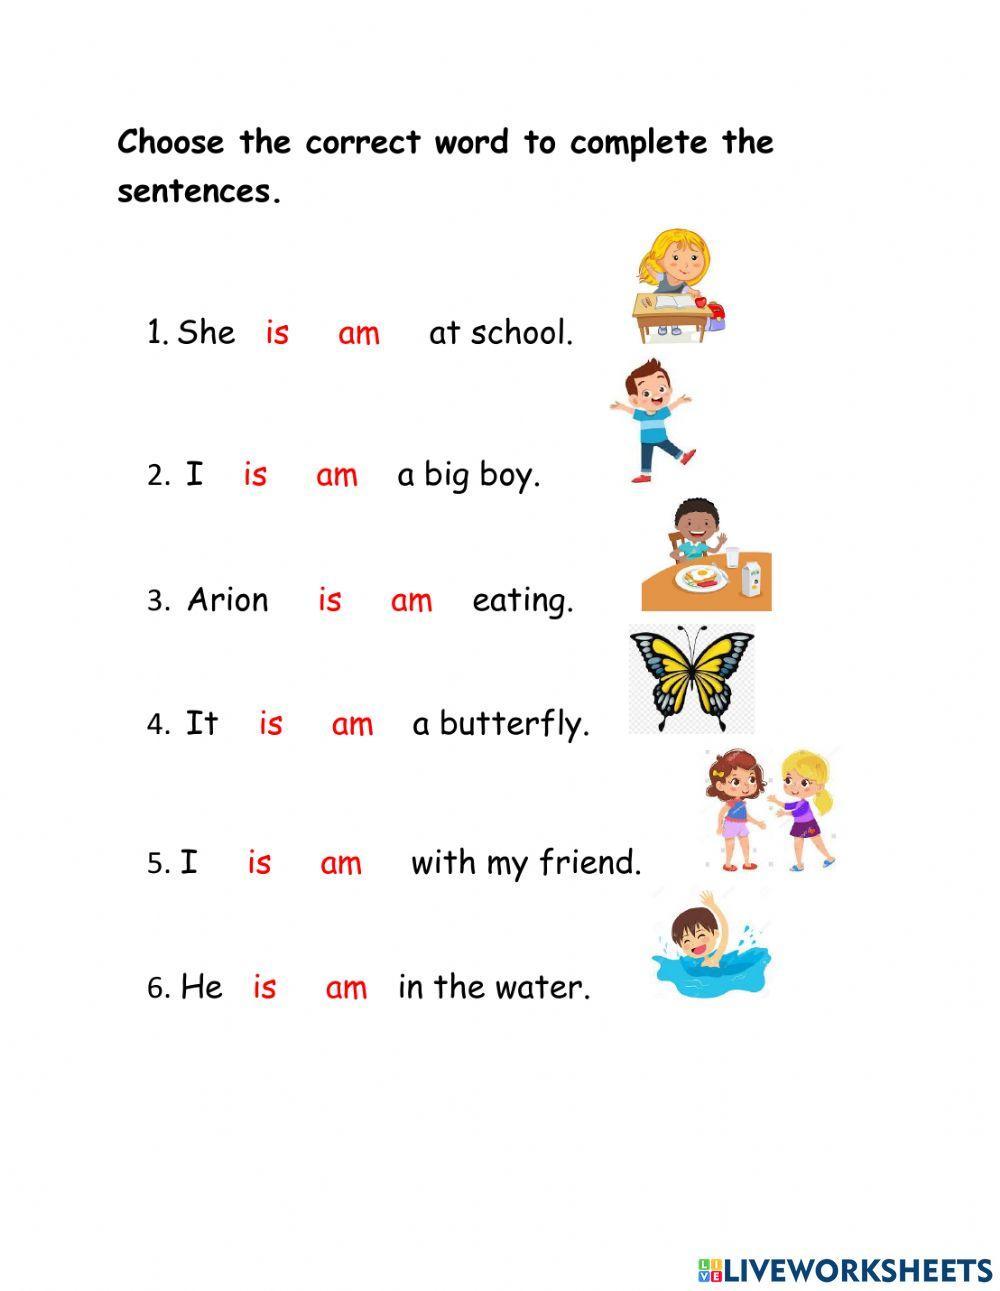 Simple Present Tense- Am, is or are